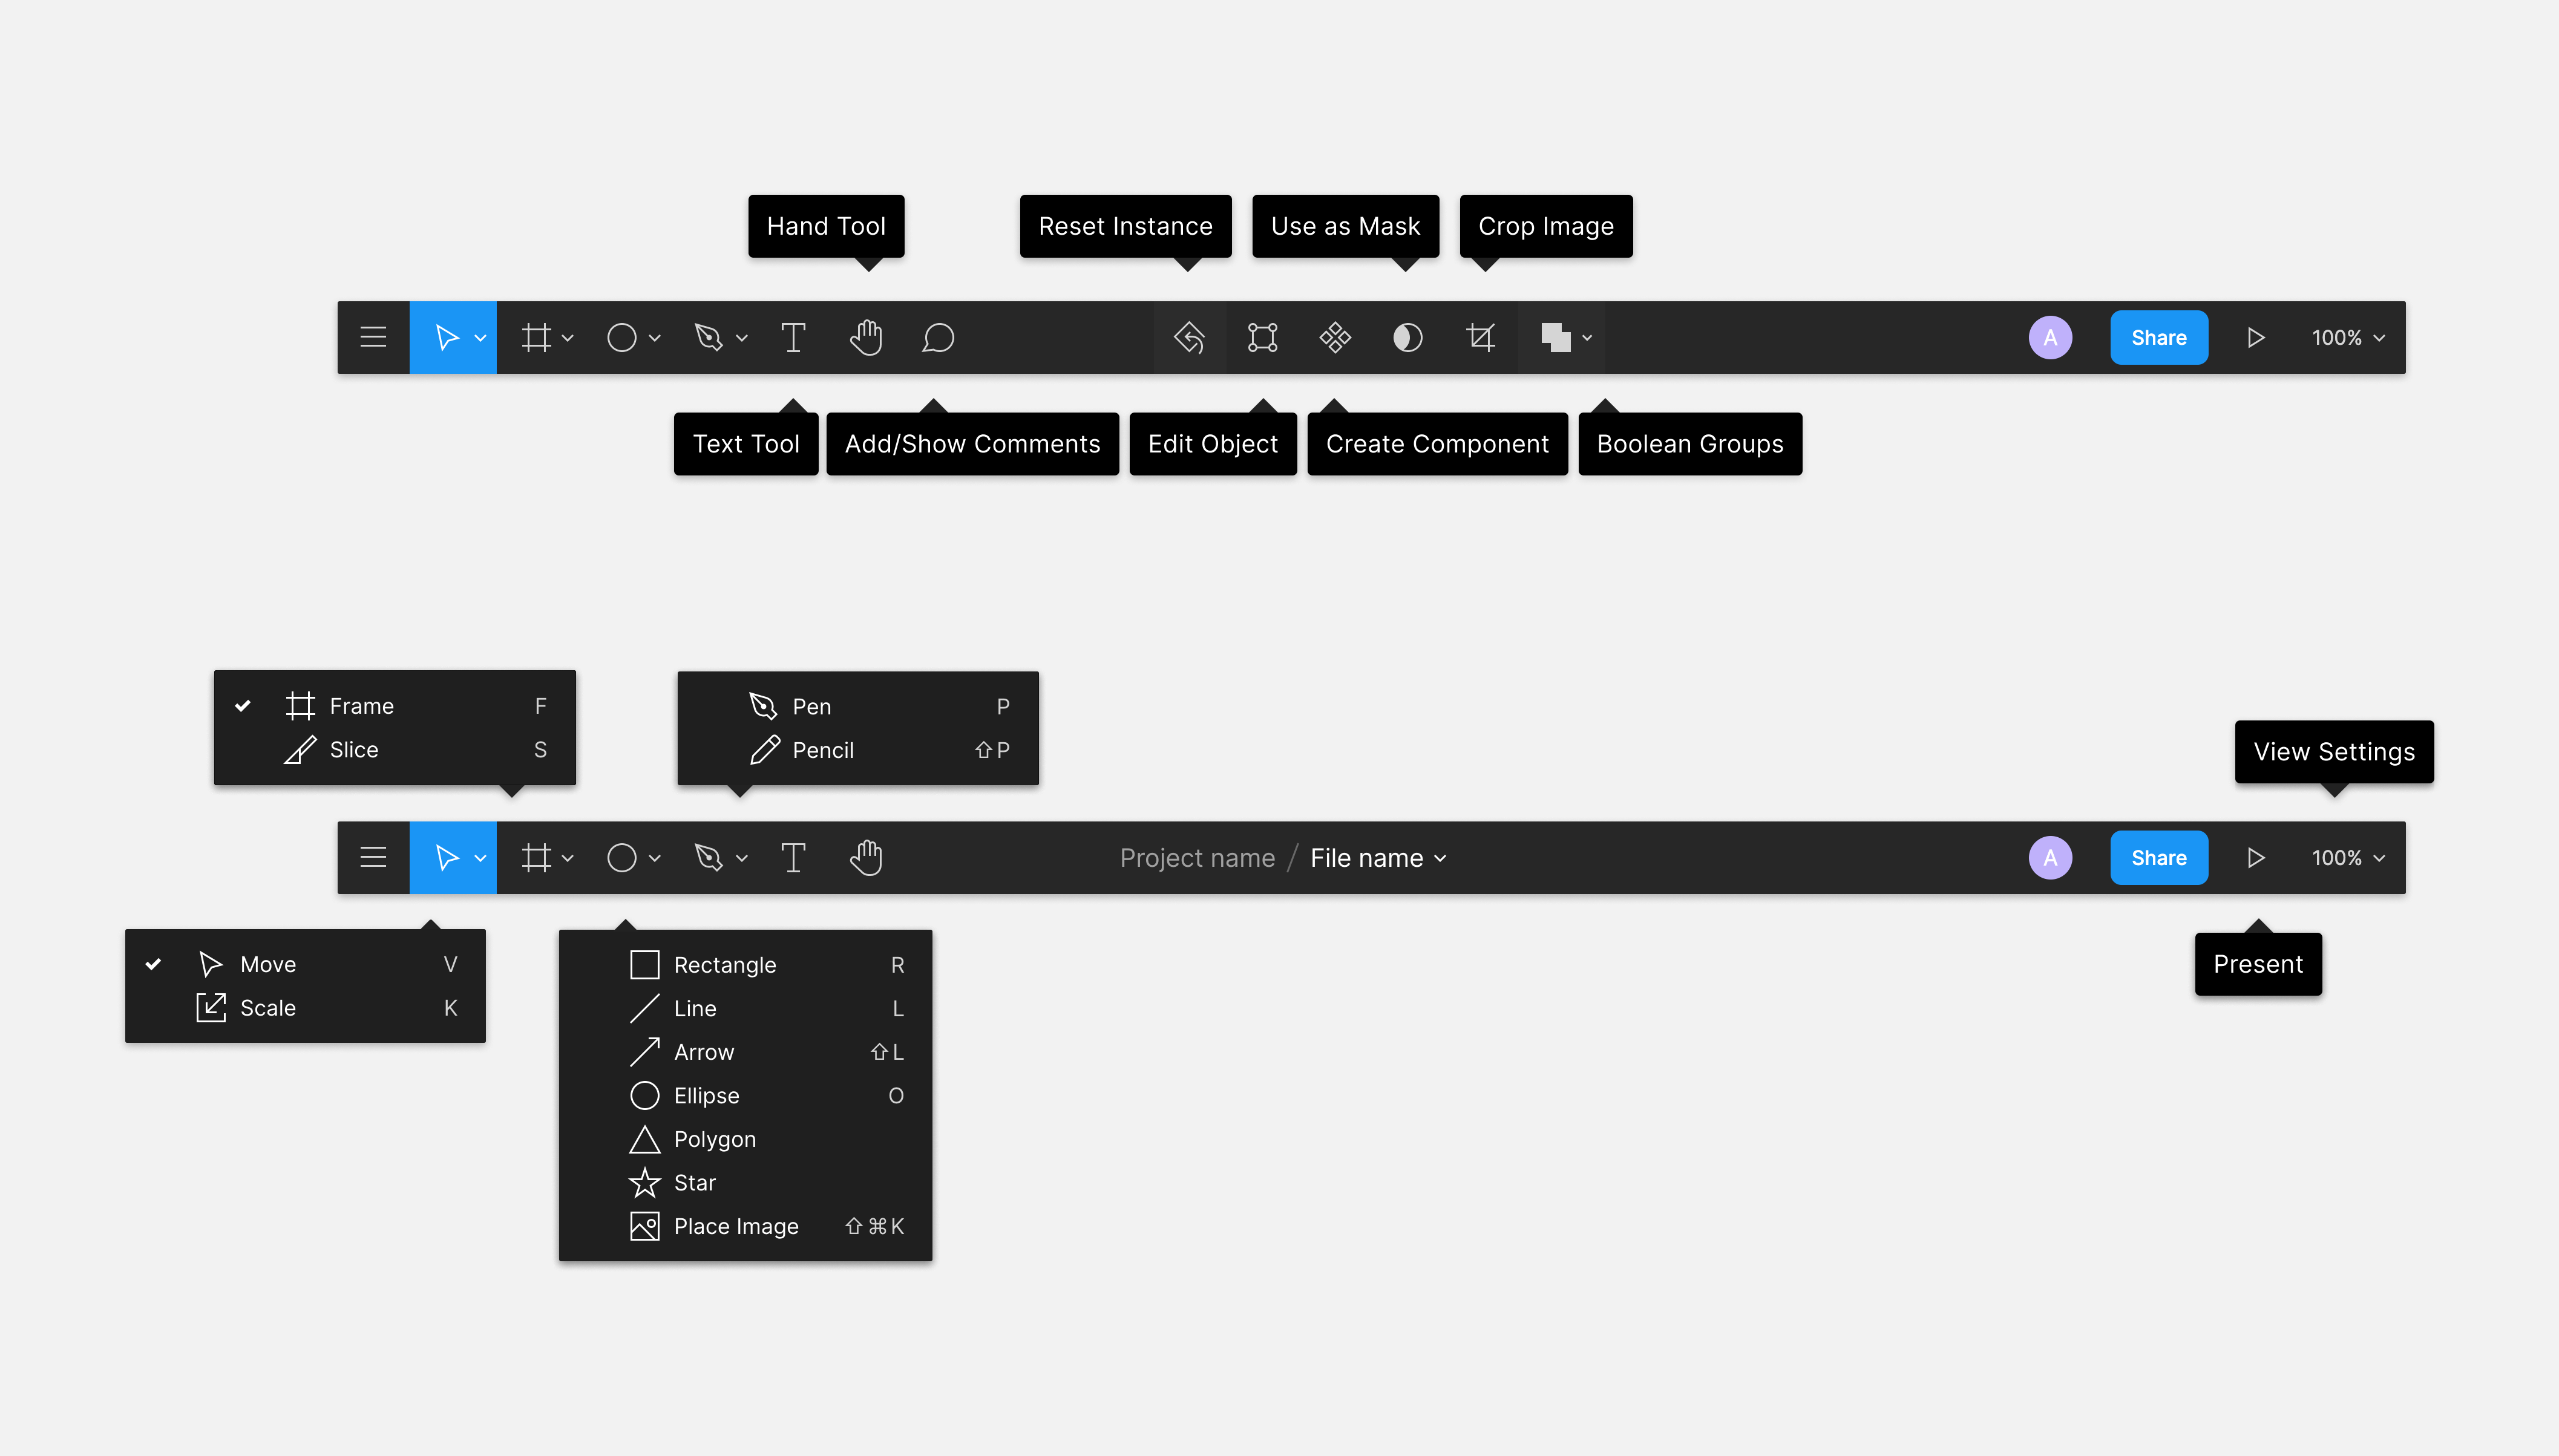 Annotated image showing all the variations of the toolbar in Figma